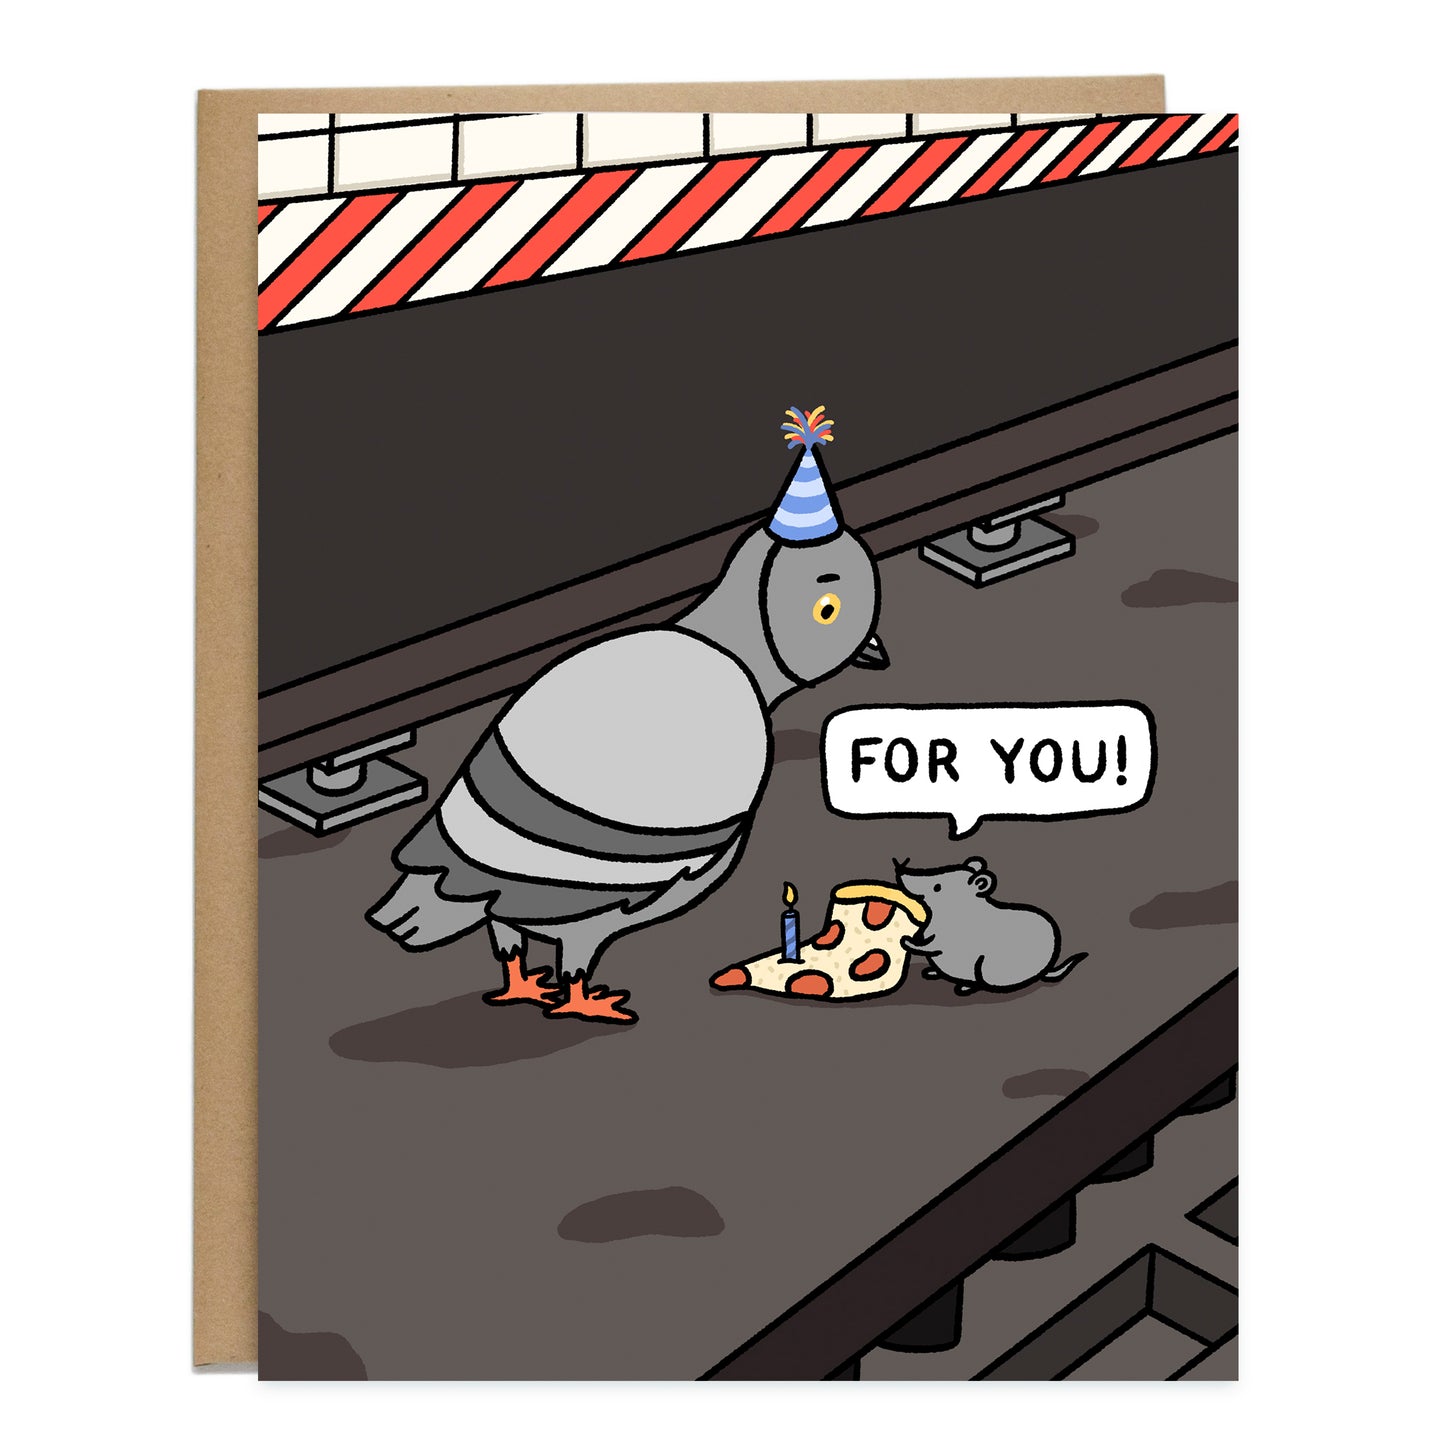 A drawing on the subway train tracks, of a pigeon wearing a birthday hat and a rat holding a pizza with a candle on it. The rat has a speech bubble above it that reads, for you!